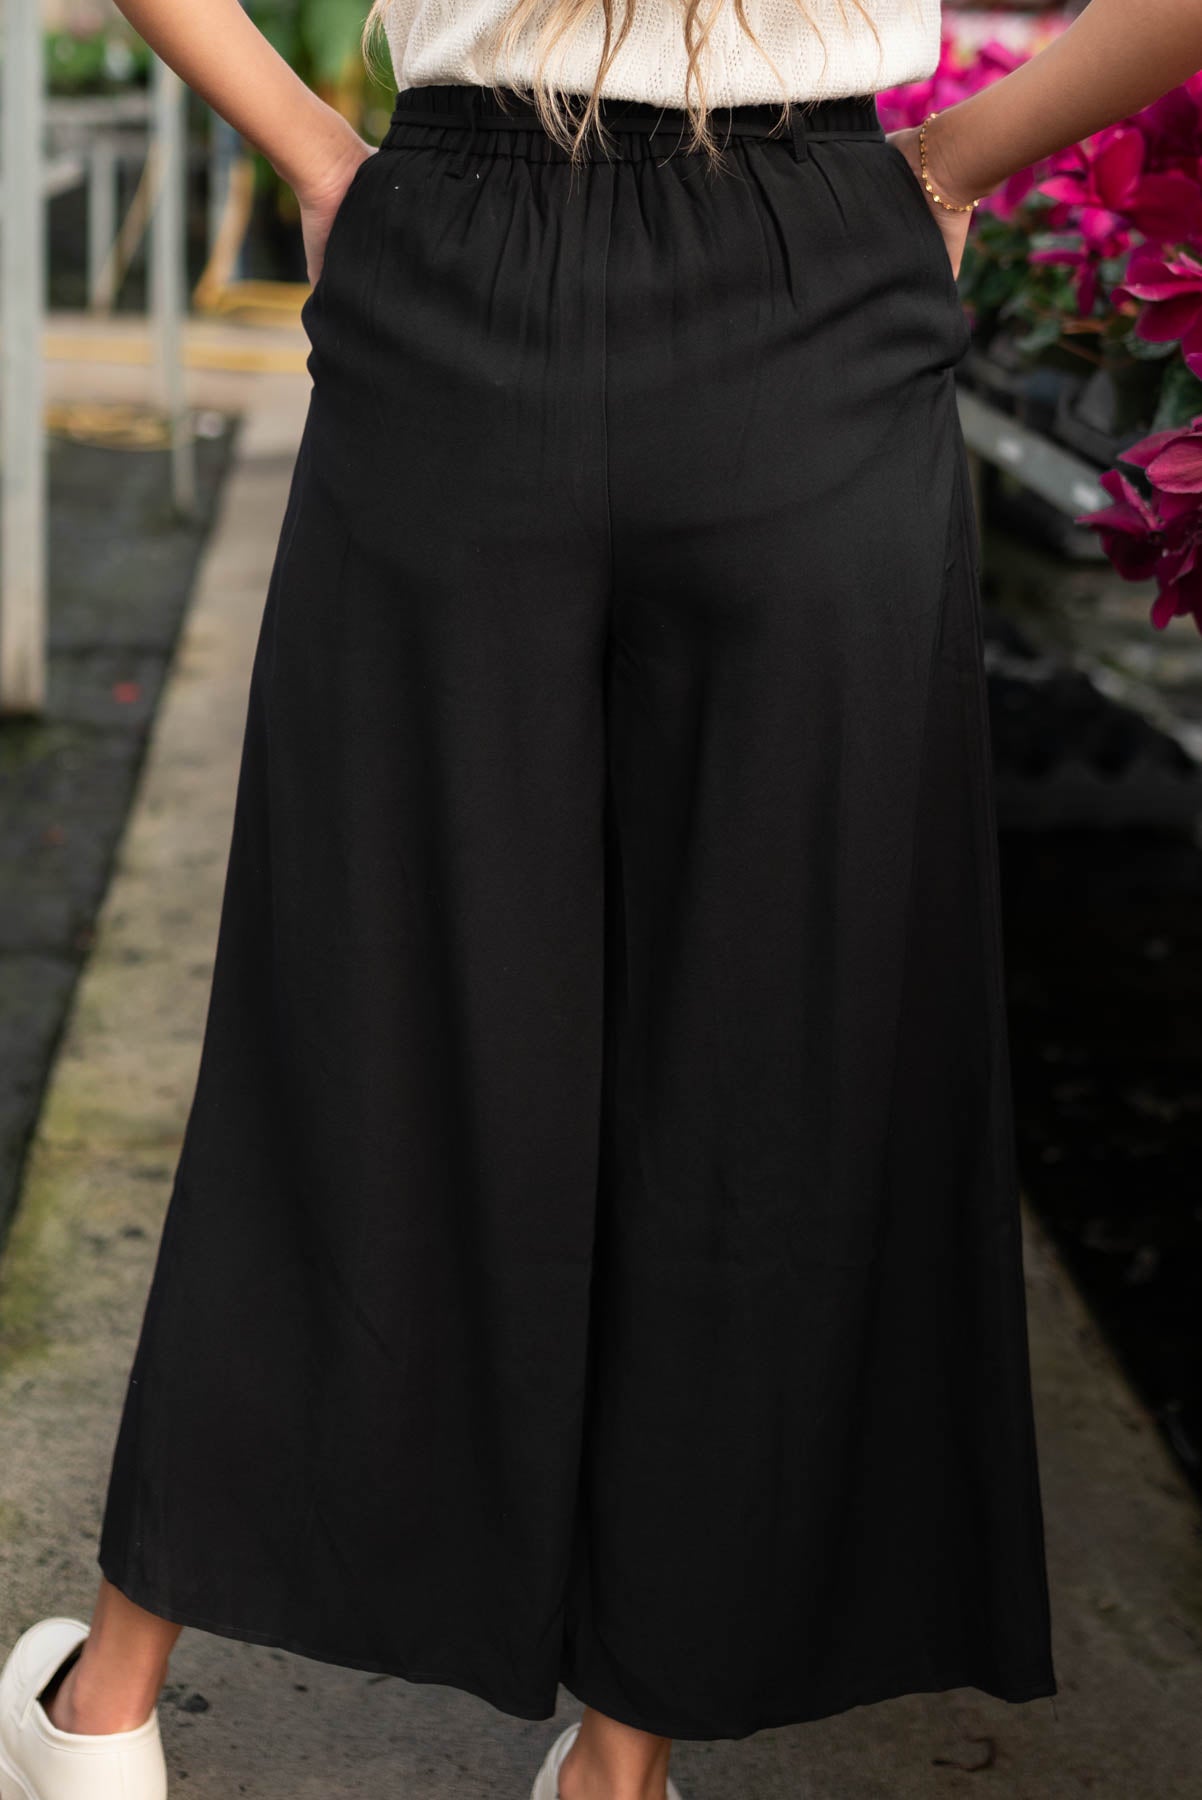 Back view of the black wide leg pants